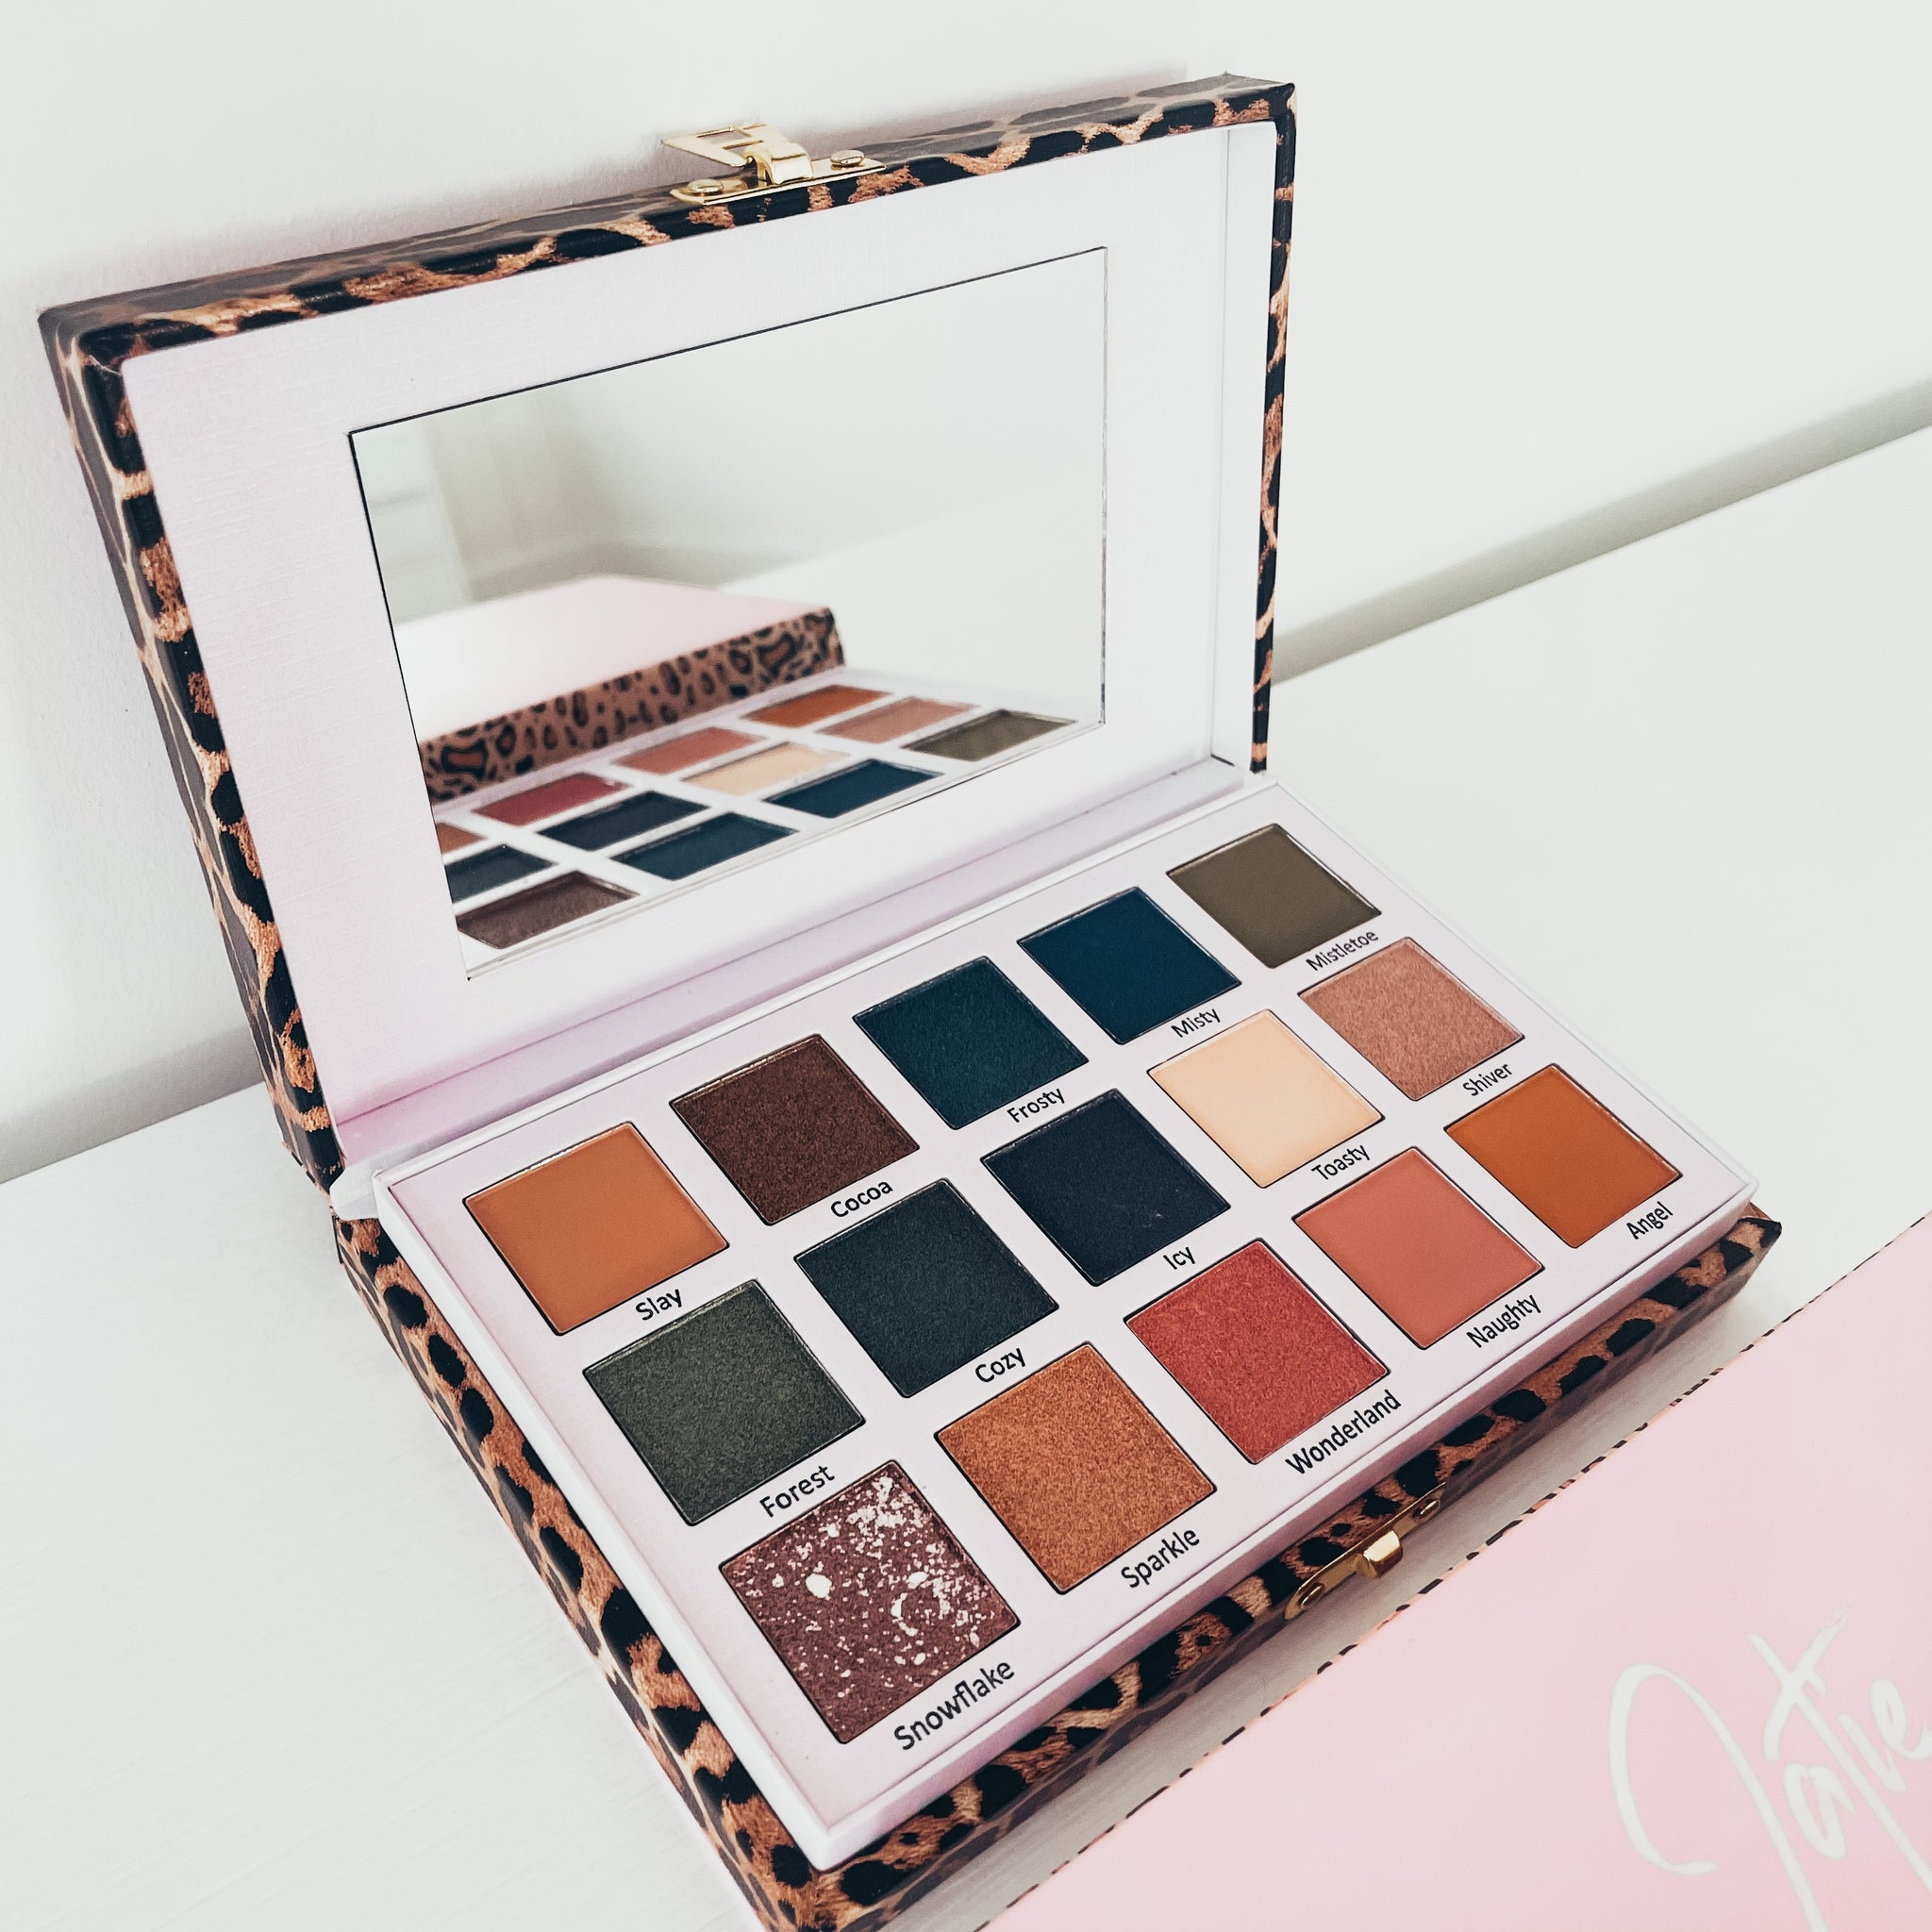 Ice Me Out Eyeshadow Palette